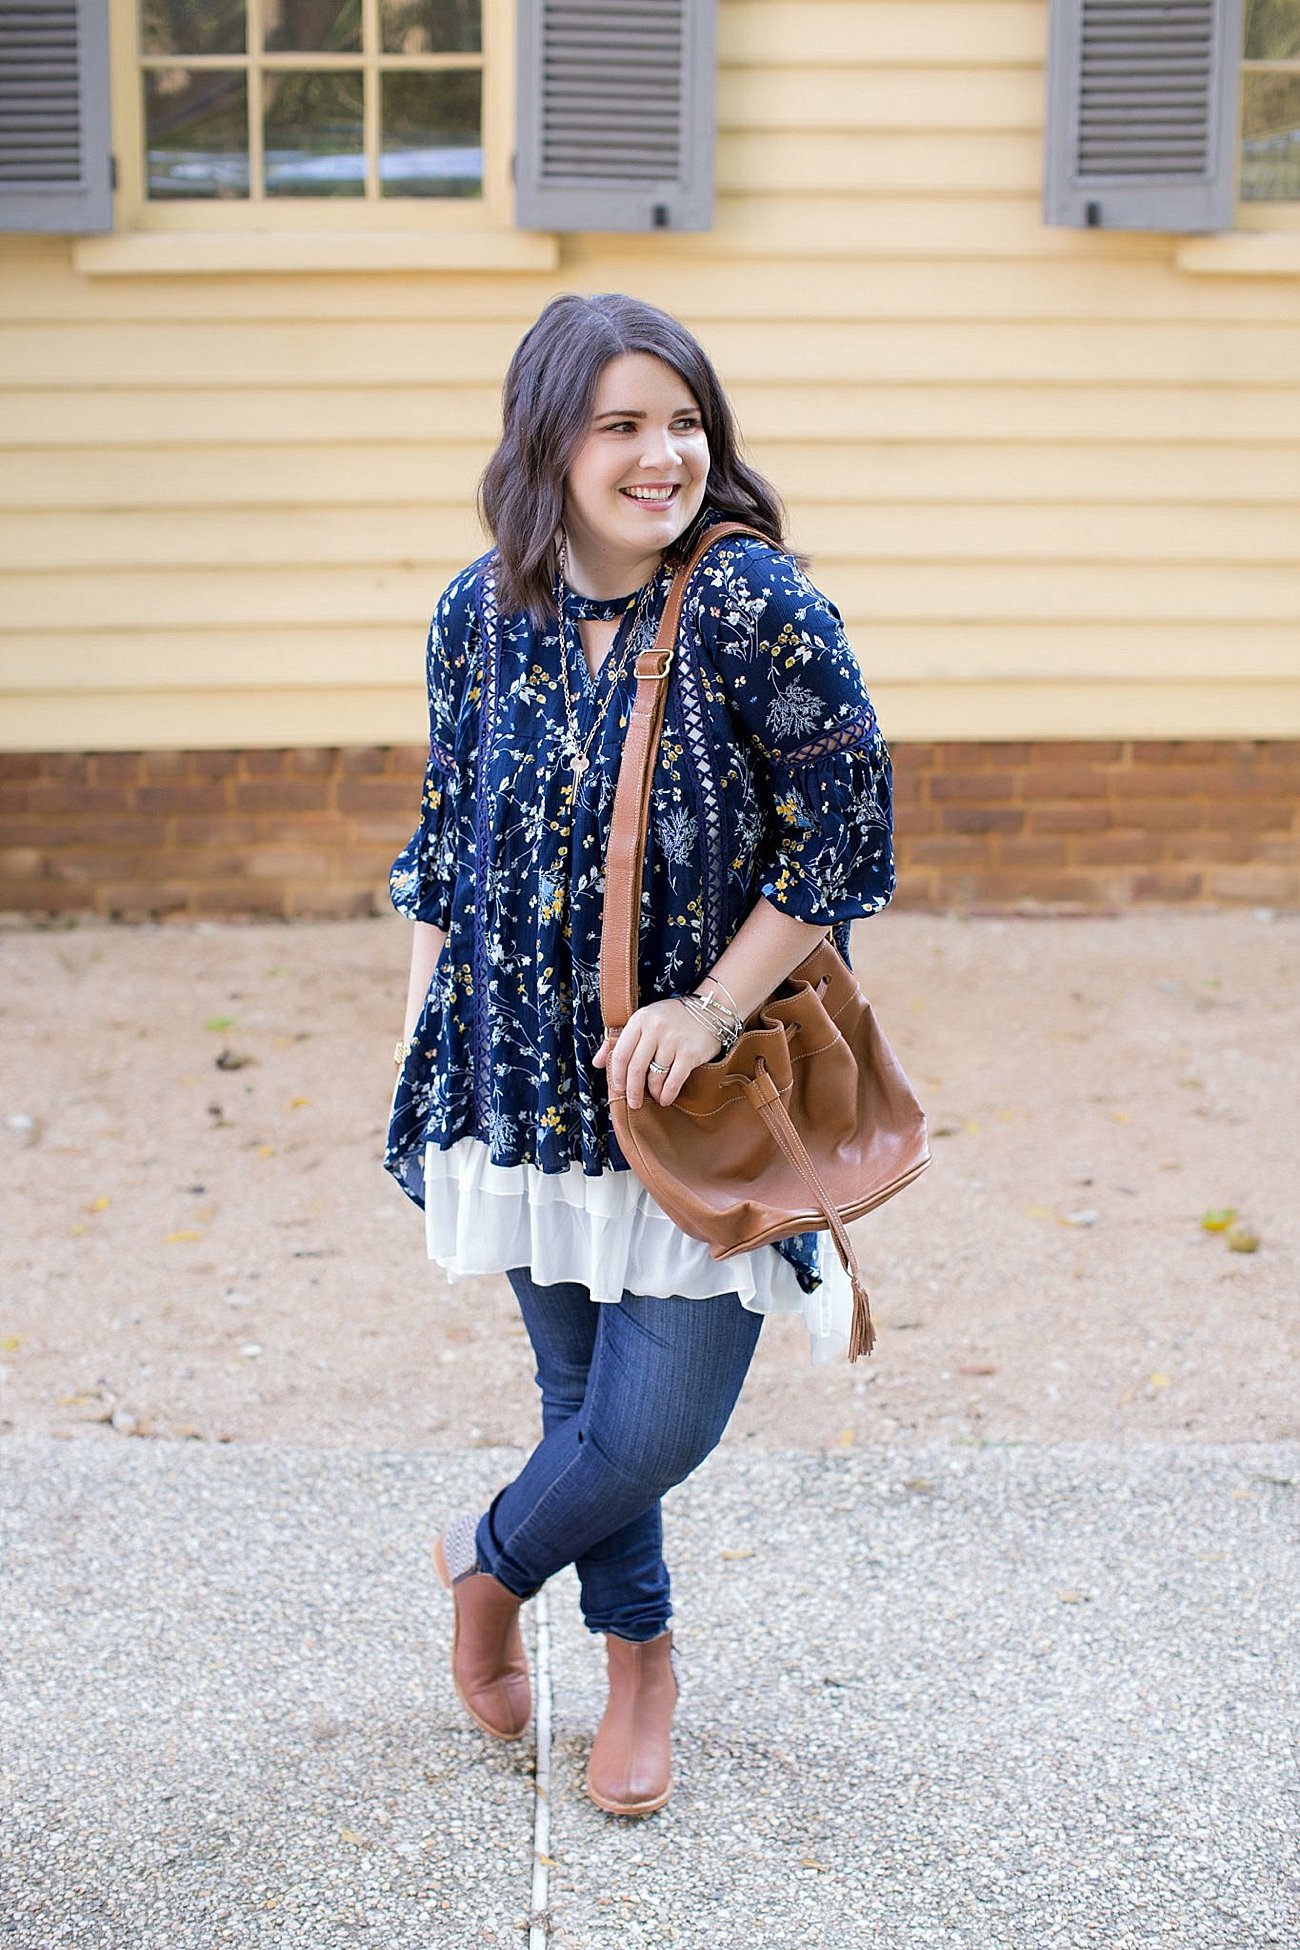 Grace & Lace peasant top and chiffon lace extender from The Flourish Market, Paige denim, Root Collective espe booties | Ethical Fashion, North Carolina Life and Style Blogger (5)